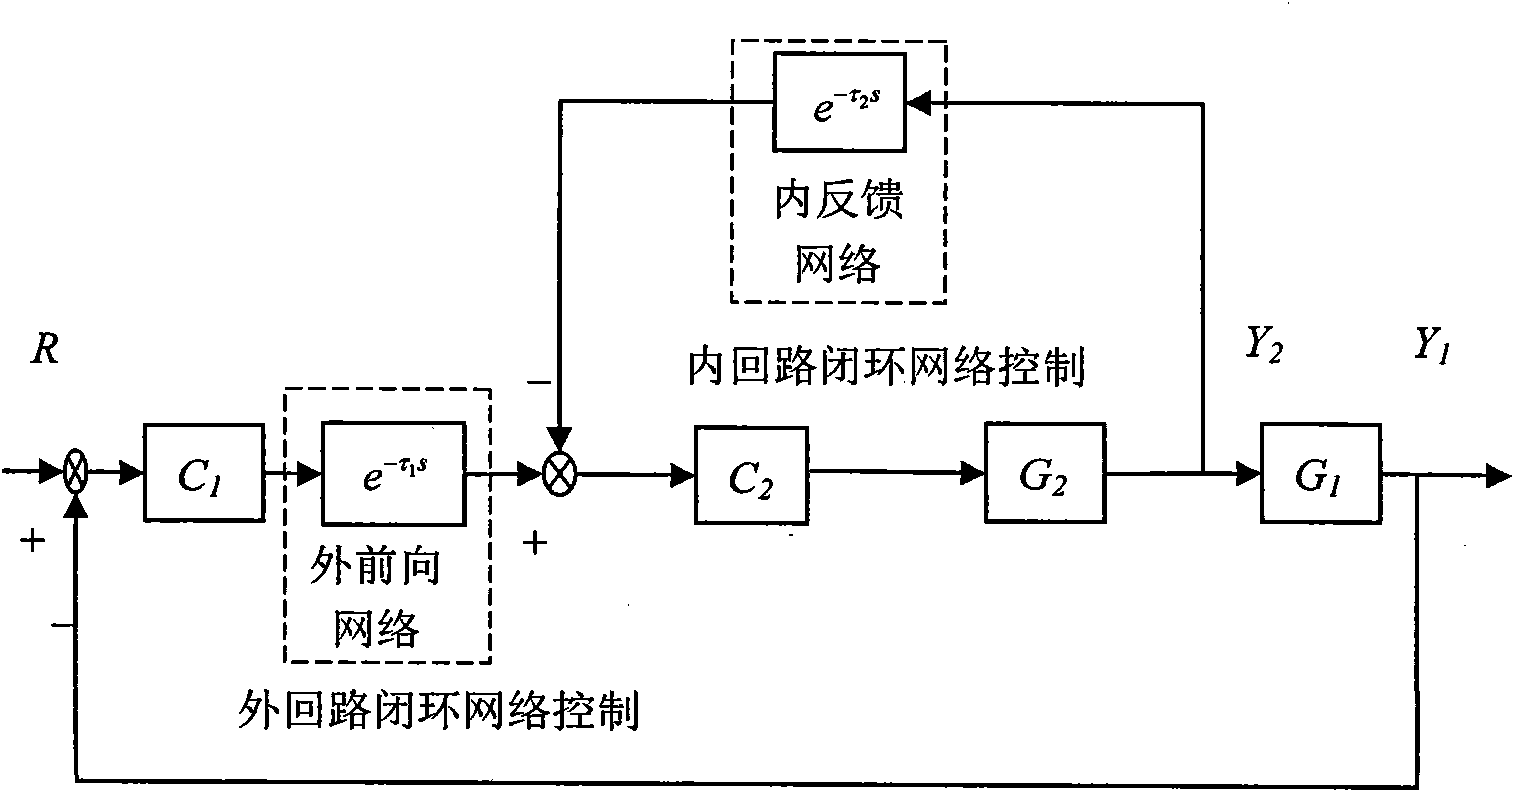 Compensation method of random time-delay of external forward and internal feedback path of network cascade control system